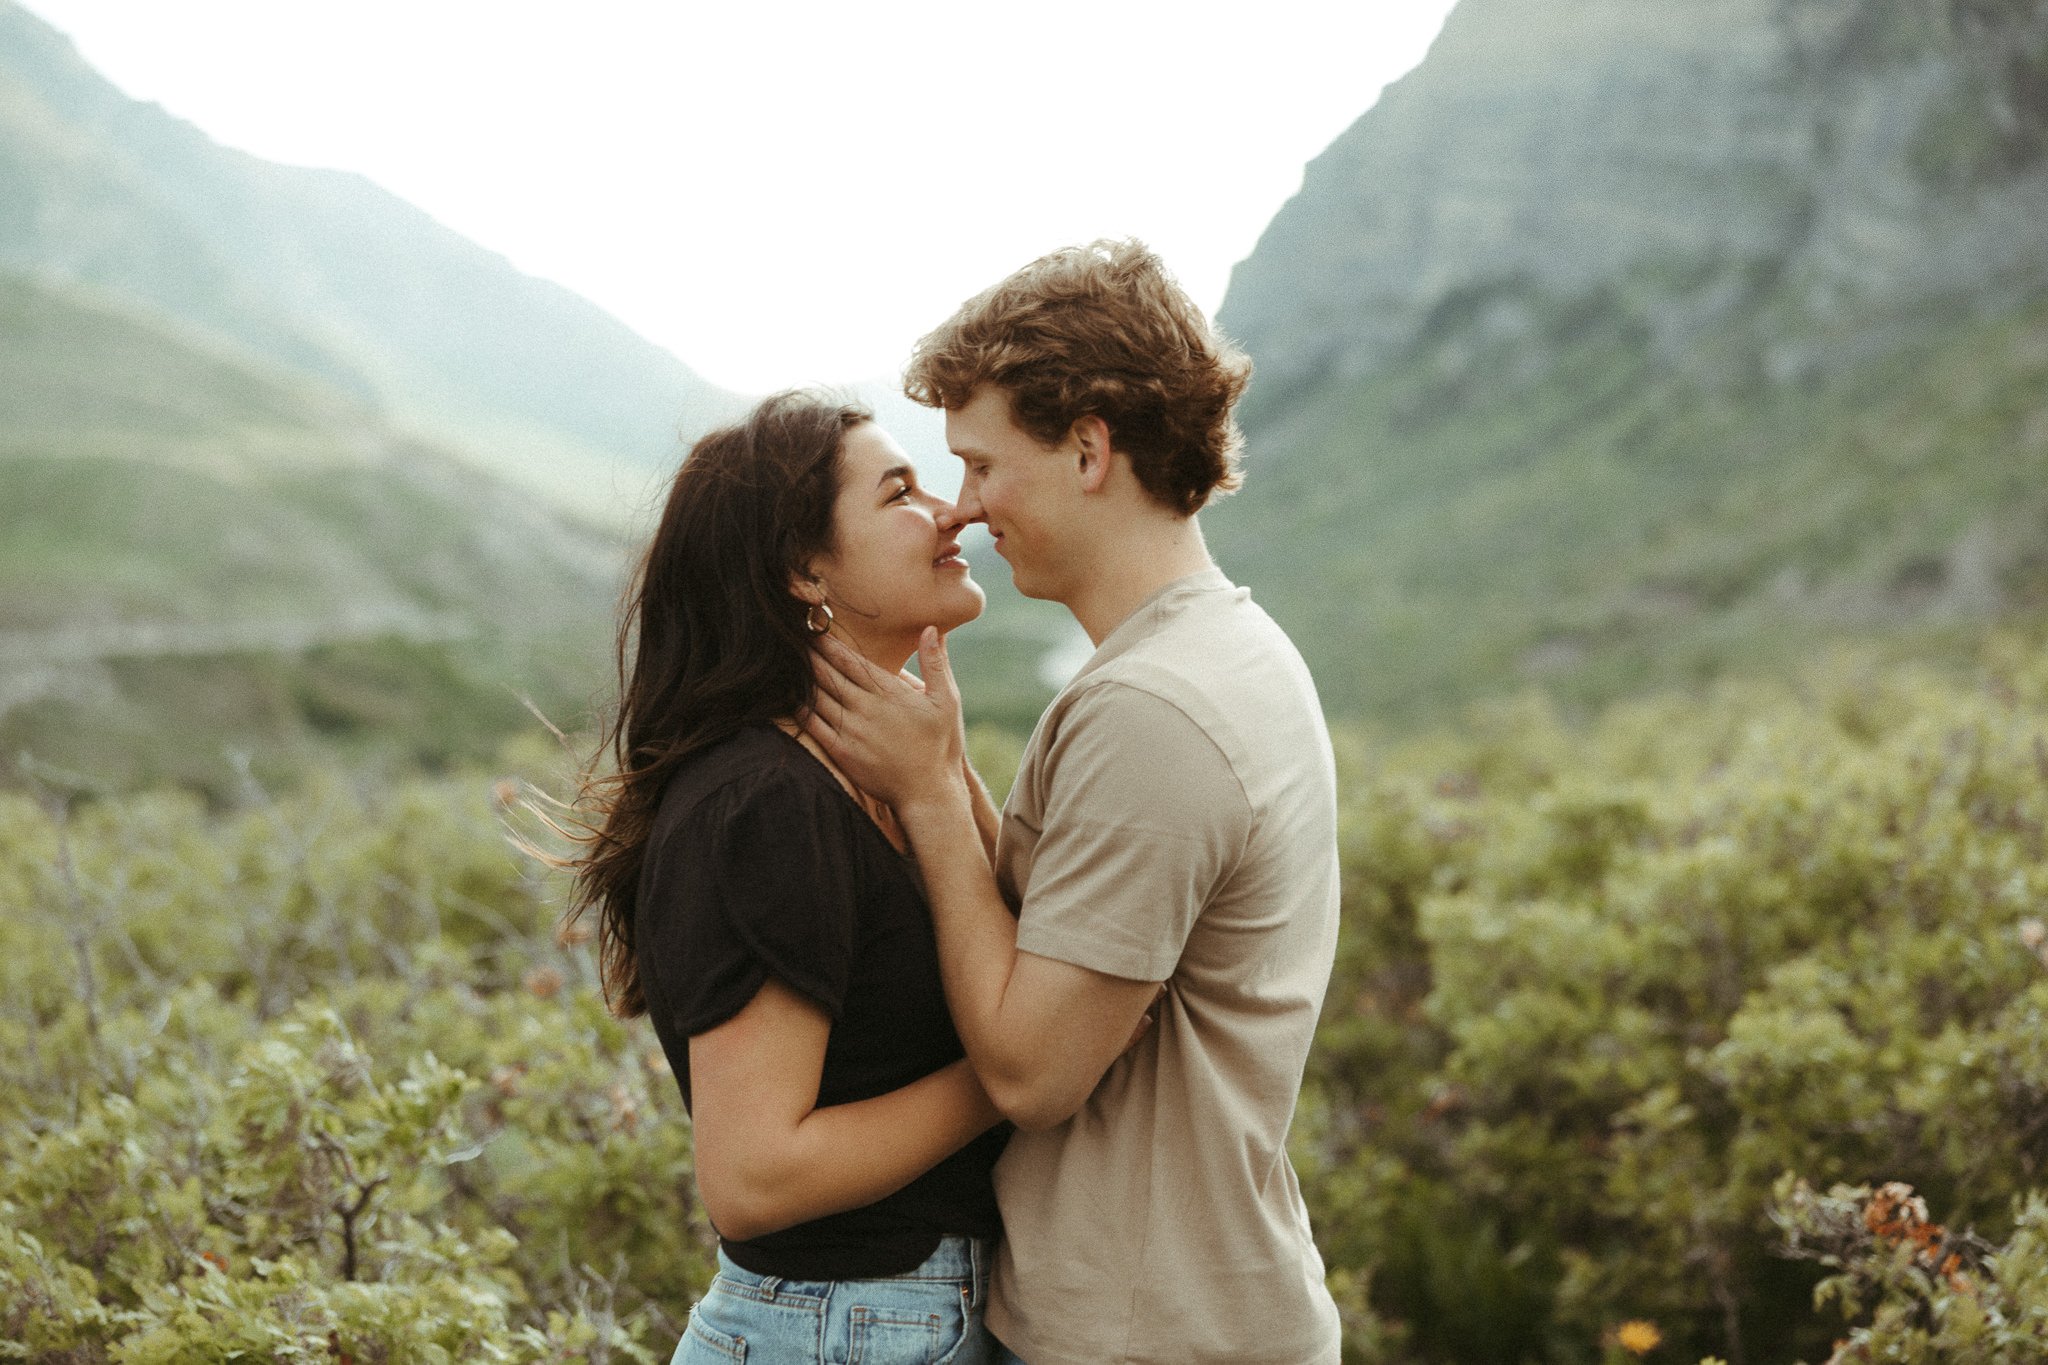 Spring-Provo-Canyon-Wildflowers-Engagement-Session-54